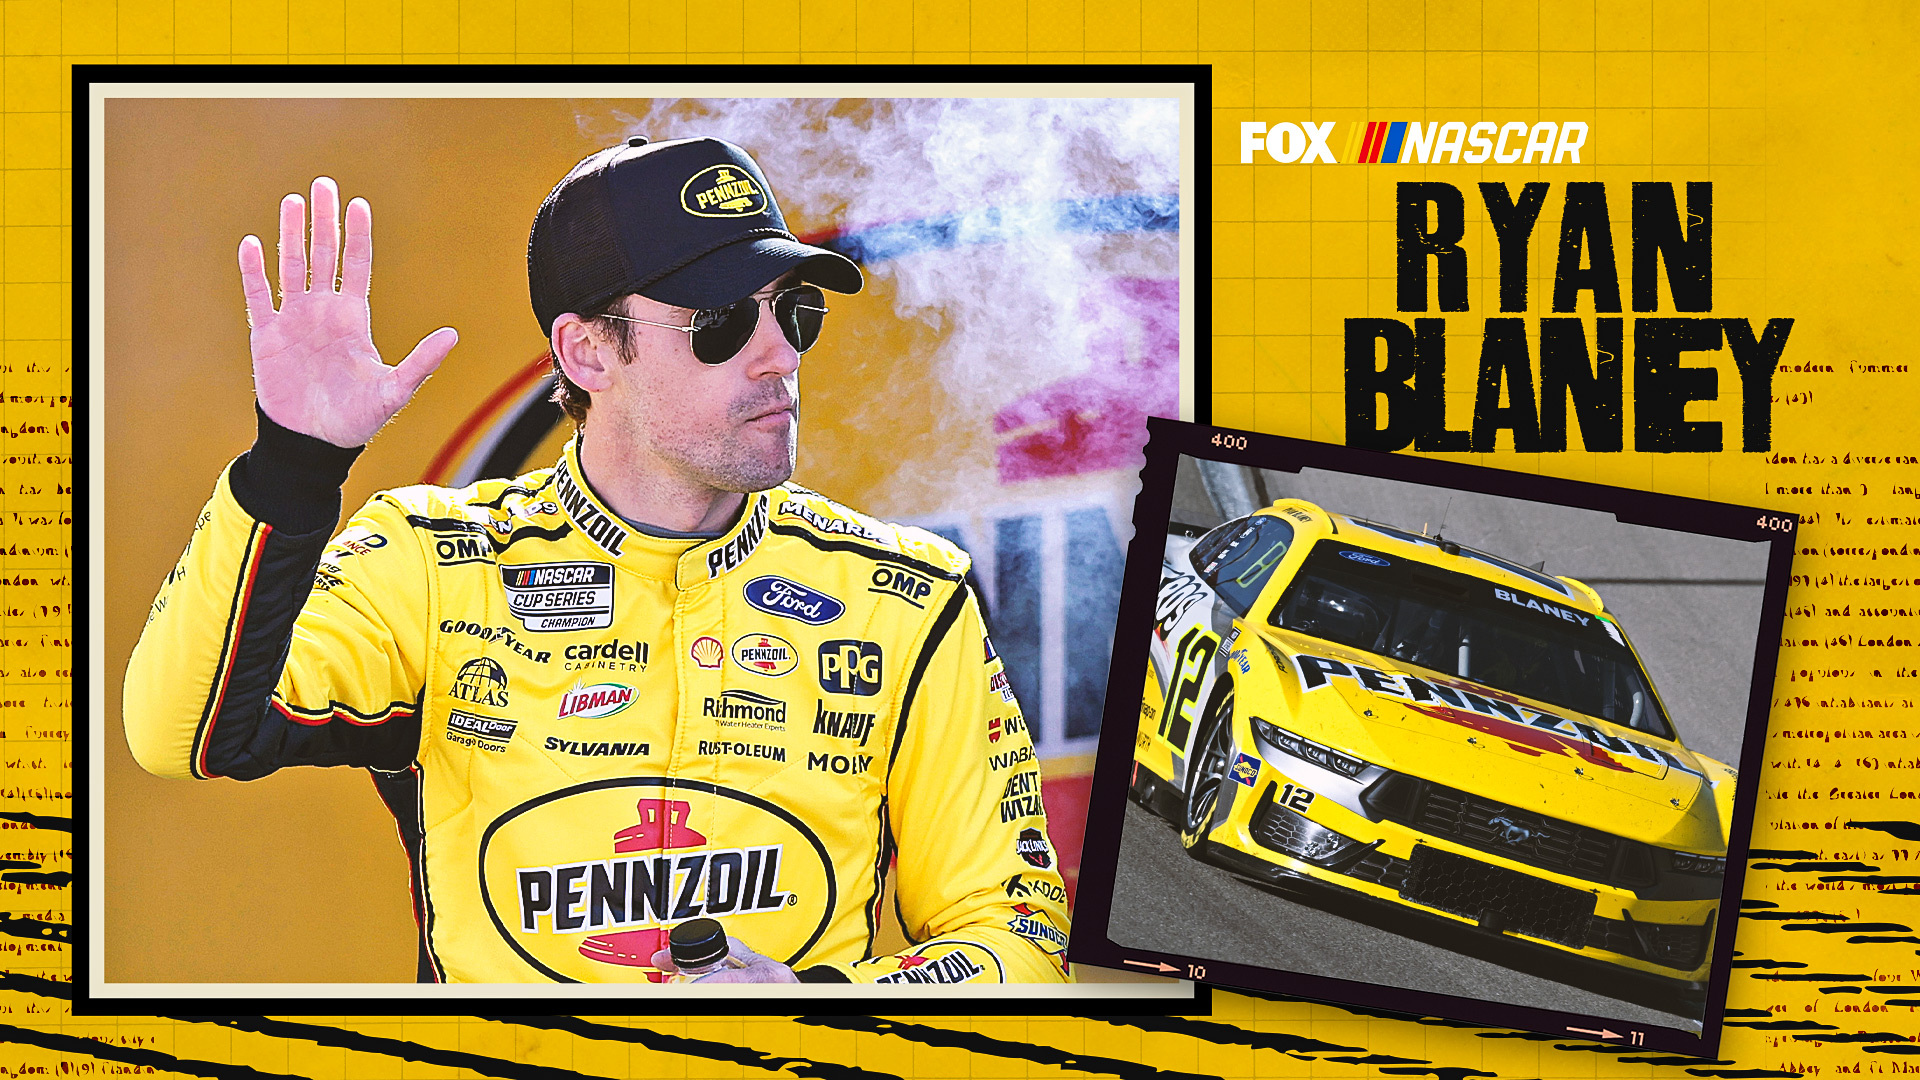 Ryan Blaney 1-on-1: On being the reigning champ, planning for a wedding